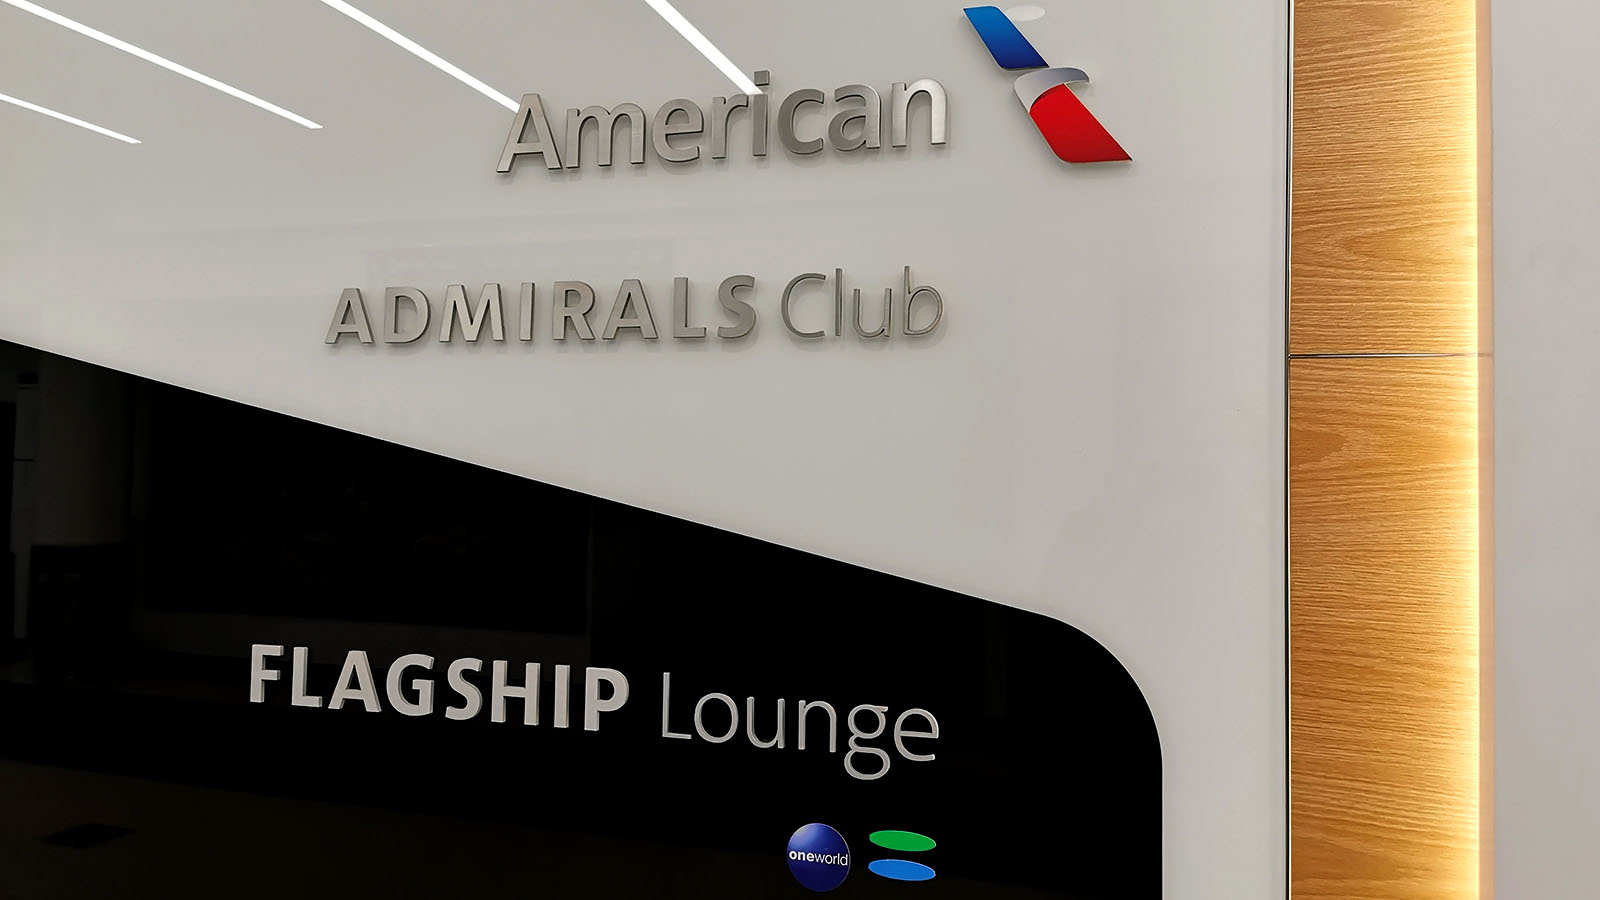 Welcome to the American Airlines Flagship Lounge, Los Angeles